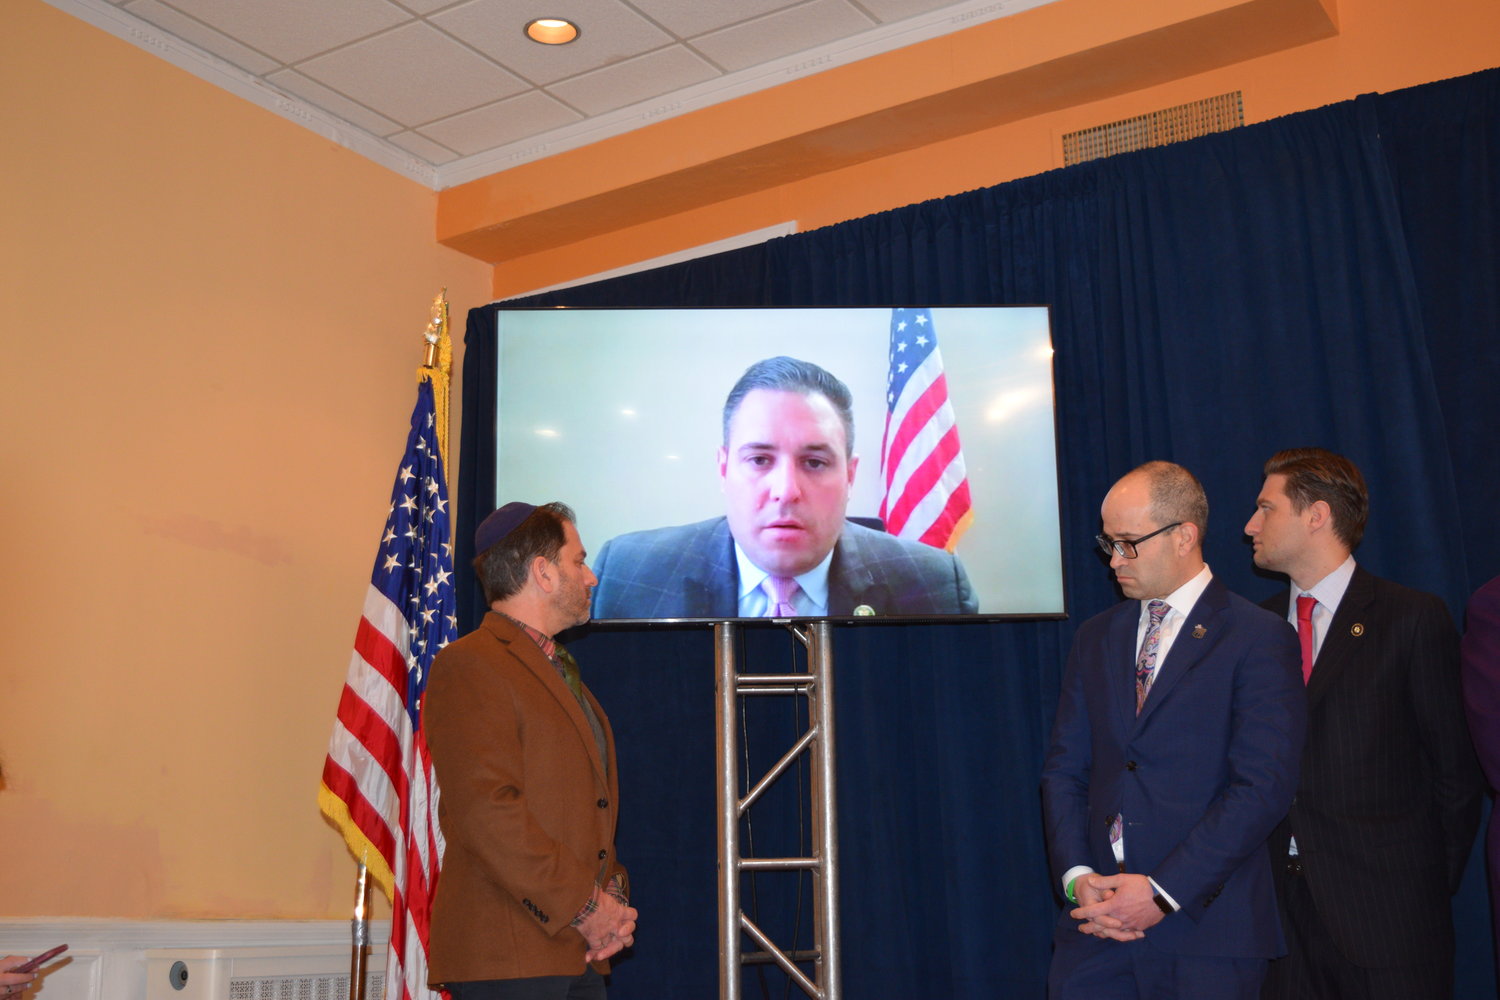 Congressman Anthony D'Esposito joined the news conference via Zoom to condemn Santos. Nassau Republicans announced that all calls from Santos's constituents will be directed to both D'Esposito and Rep. Andrew Garbarino.